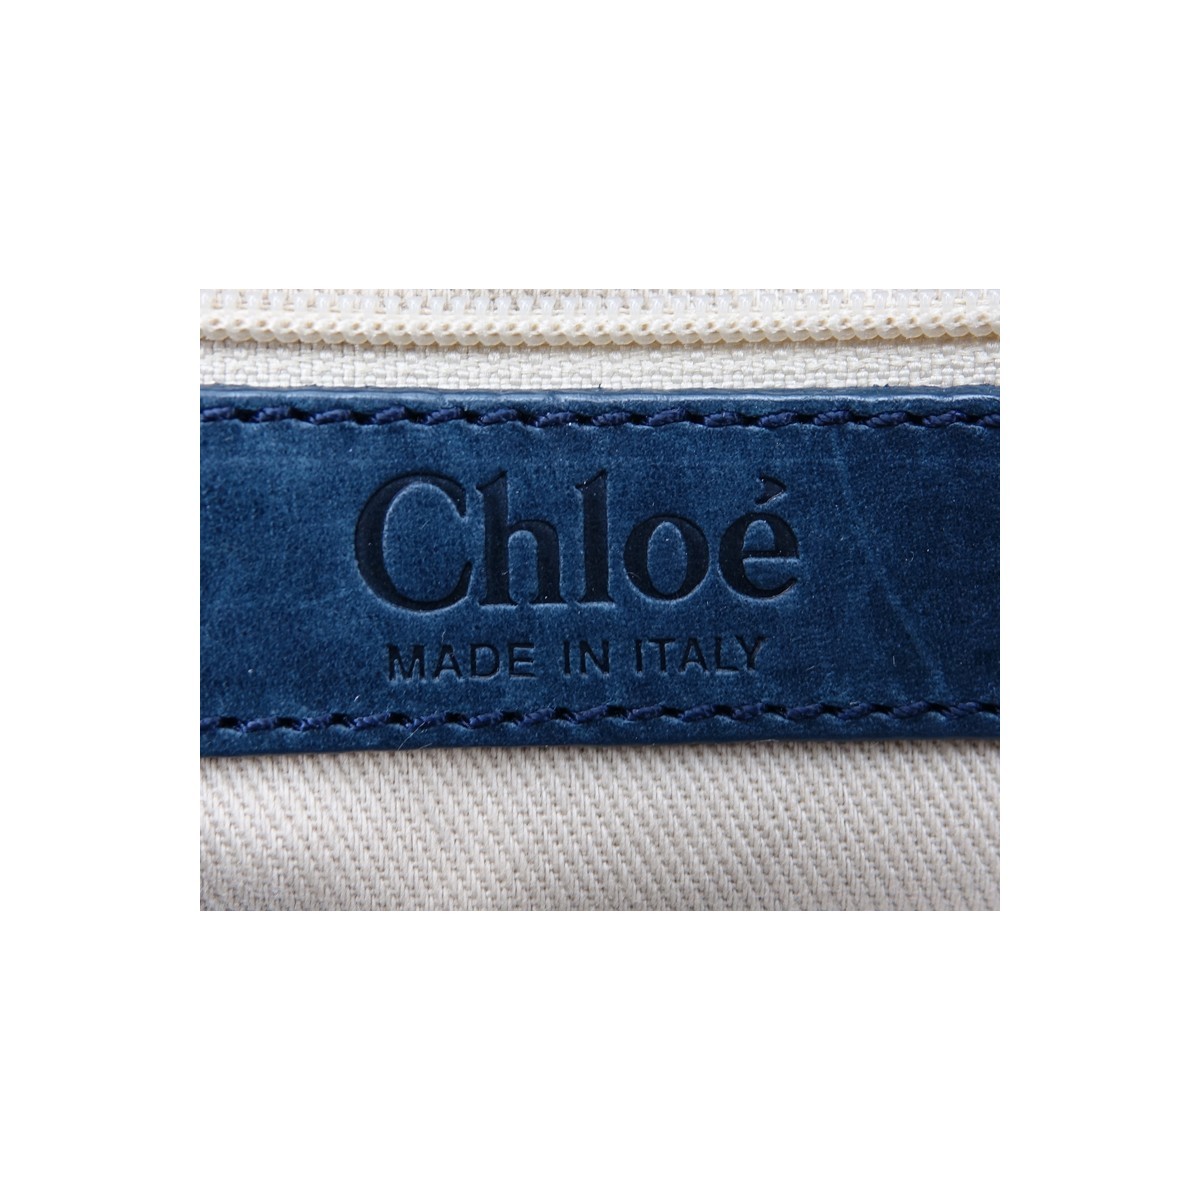 Chloe Petrol Blue Python And Leather Silverado PM Handbag. Brushed silver tone hardware, beige canvas interior with zippered and patch pockets.